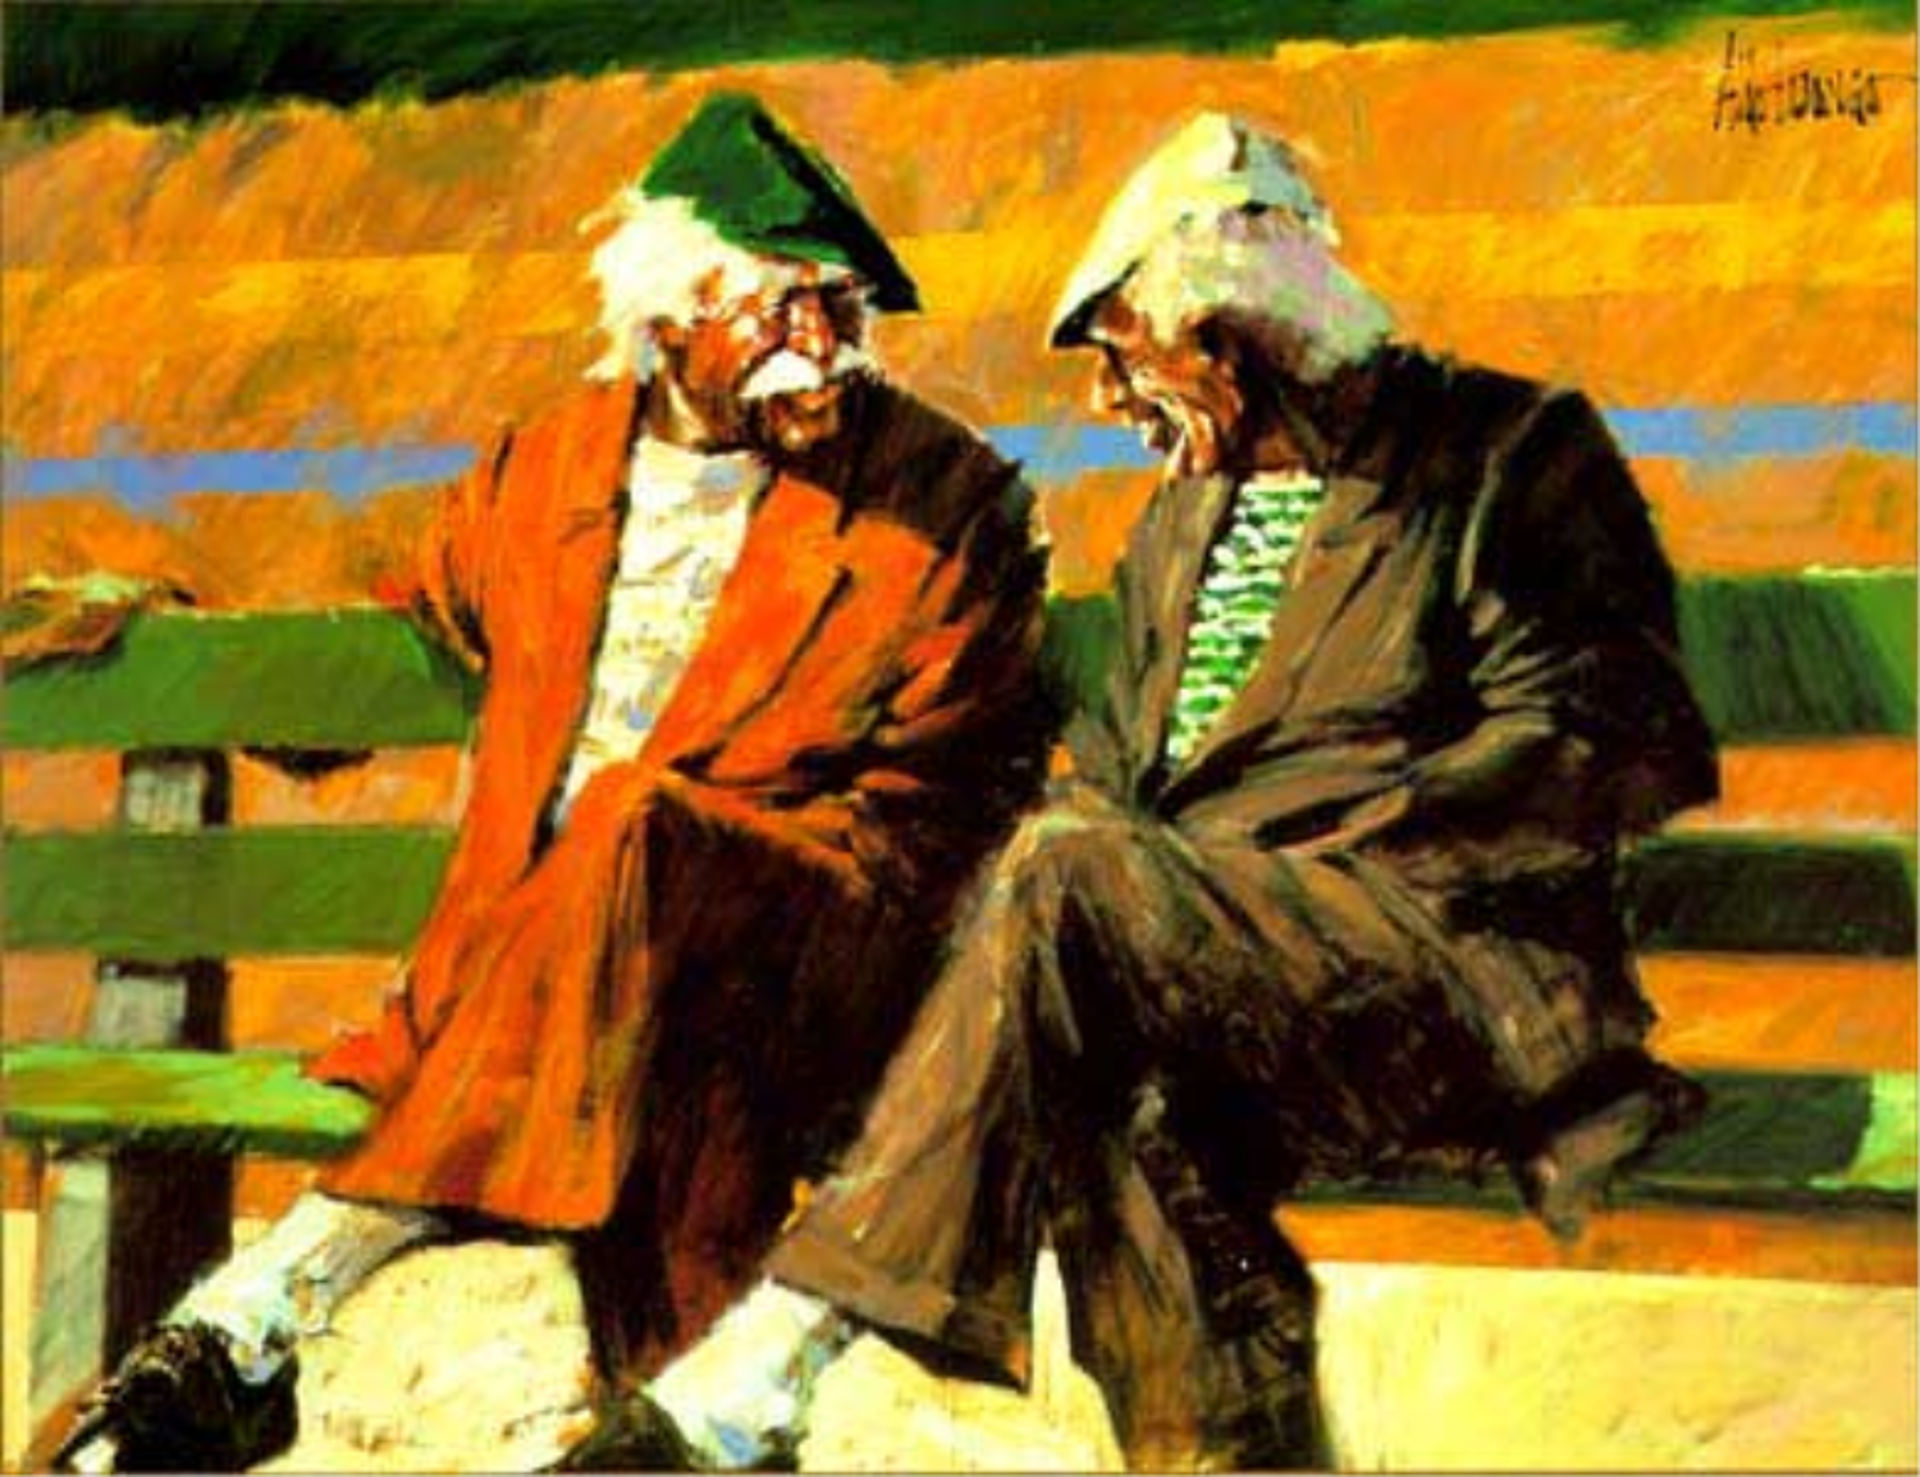 Telling Stories at the Bench by Aldo Luongo